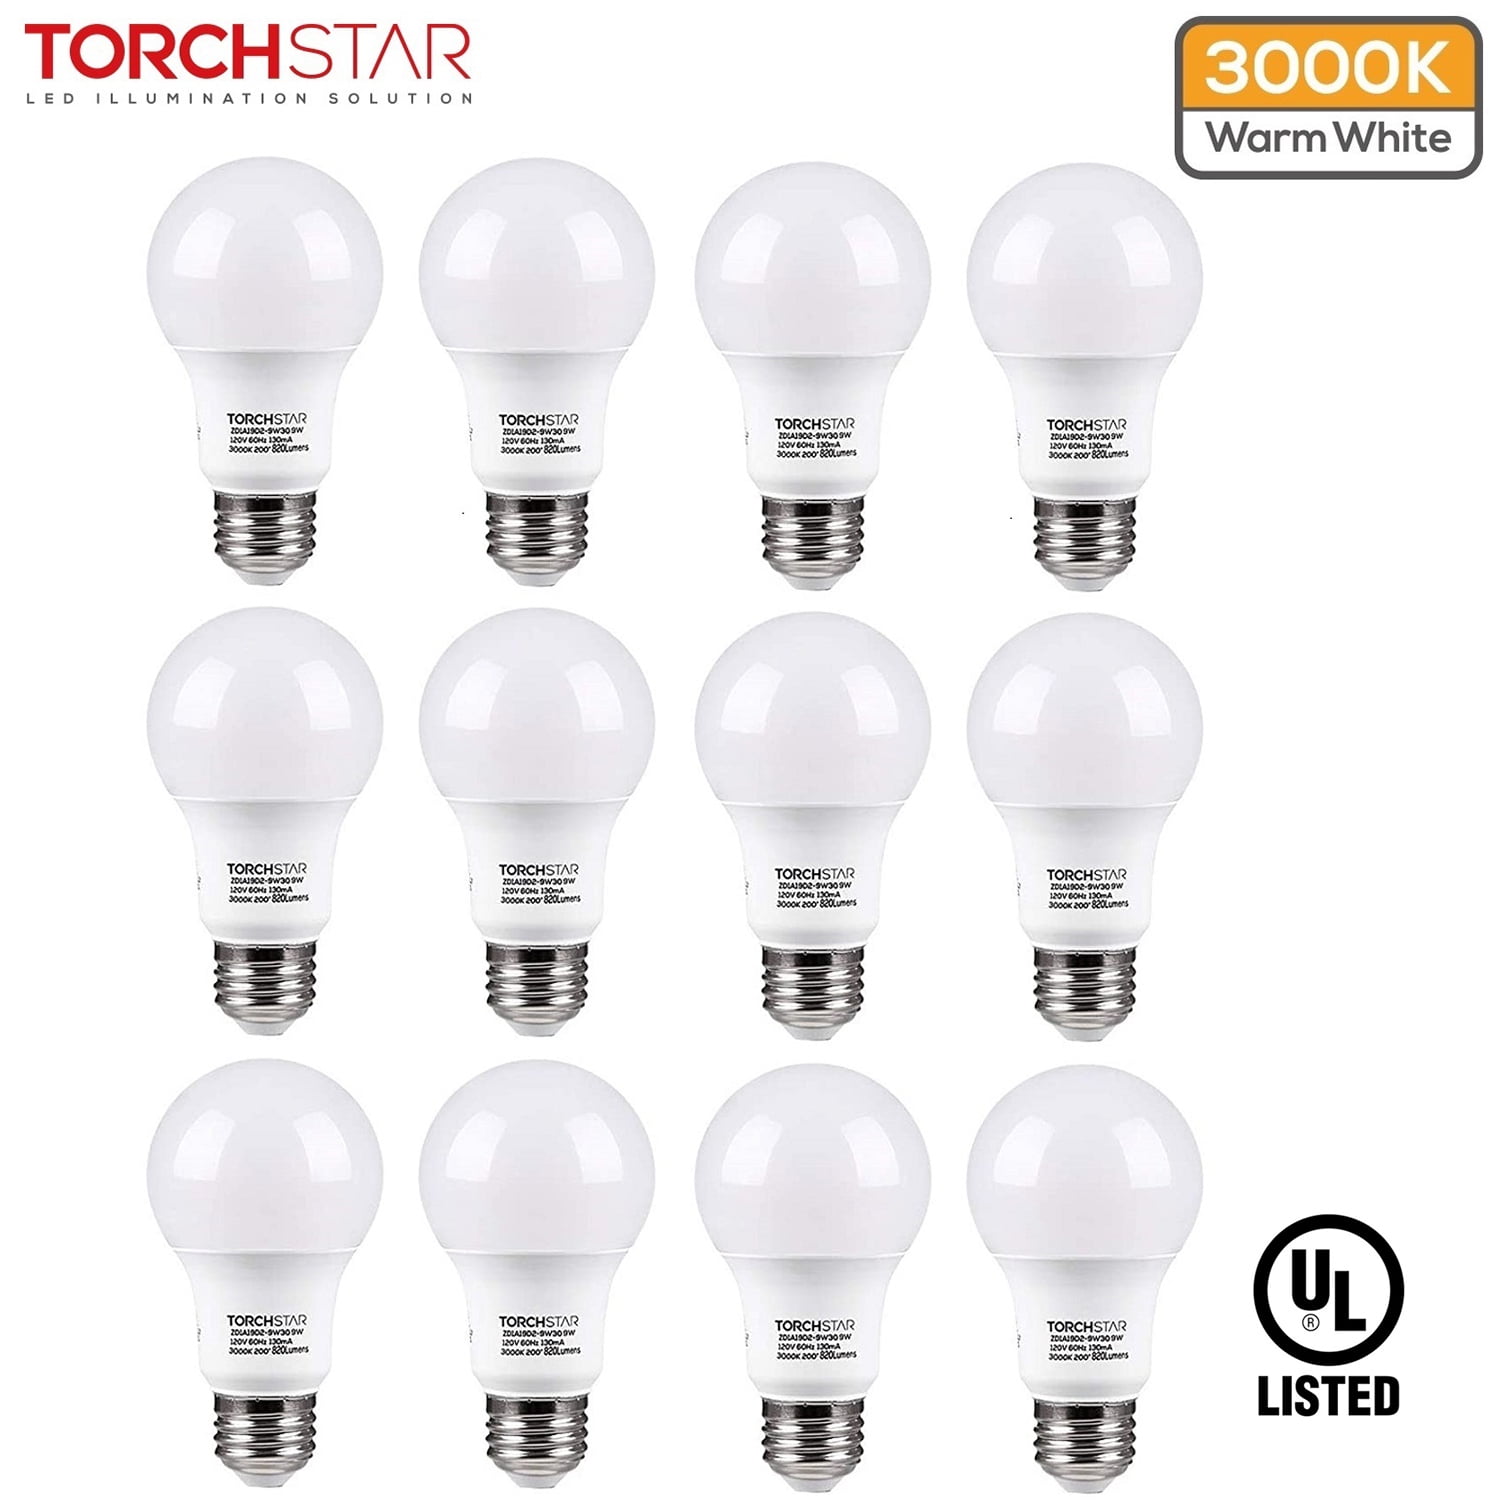 Residential and Commercial LED Bulbs